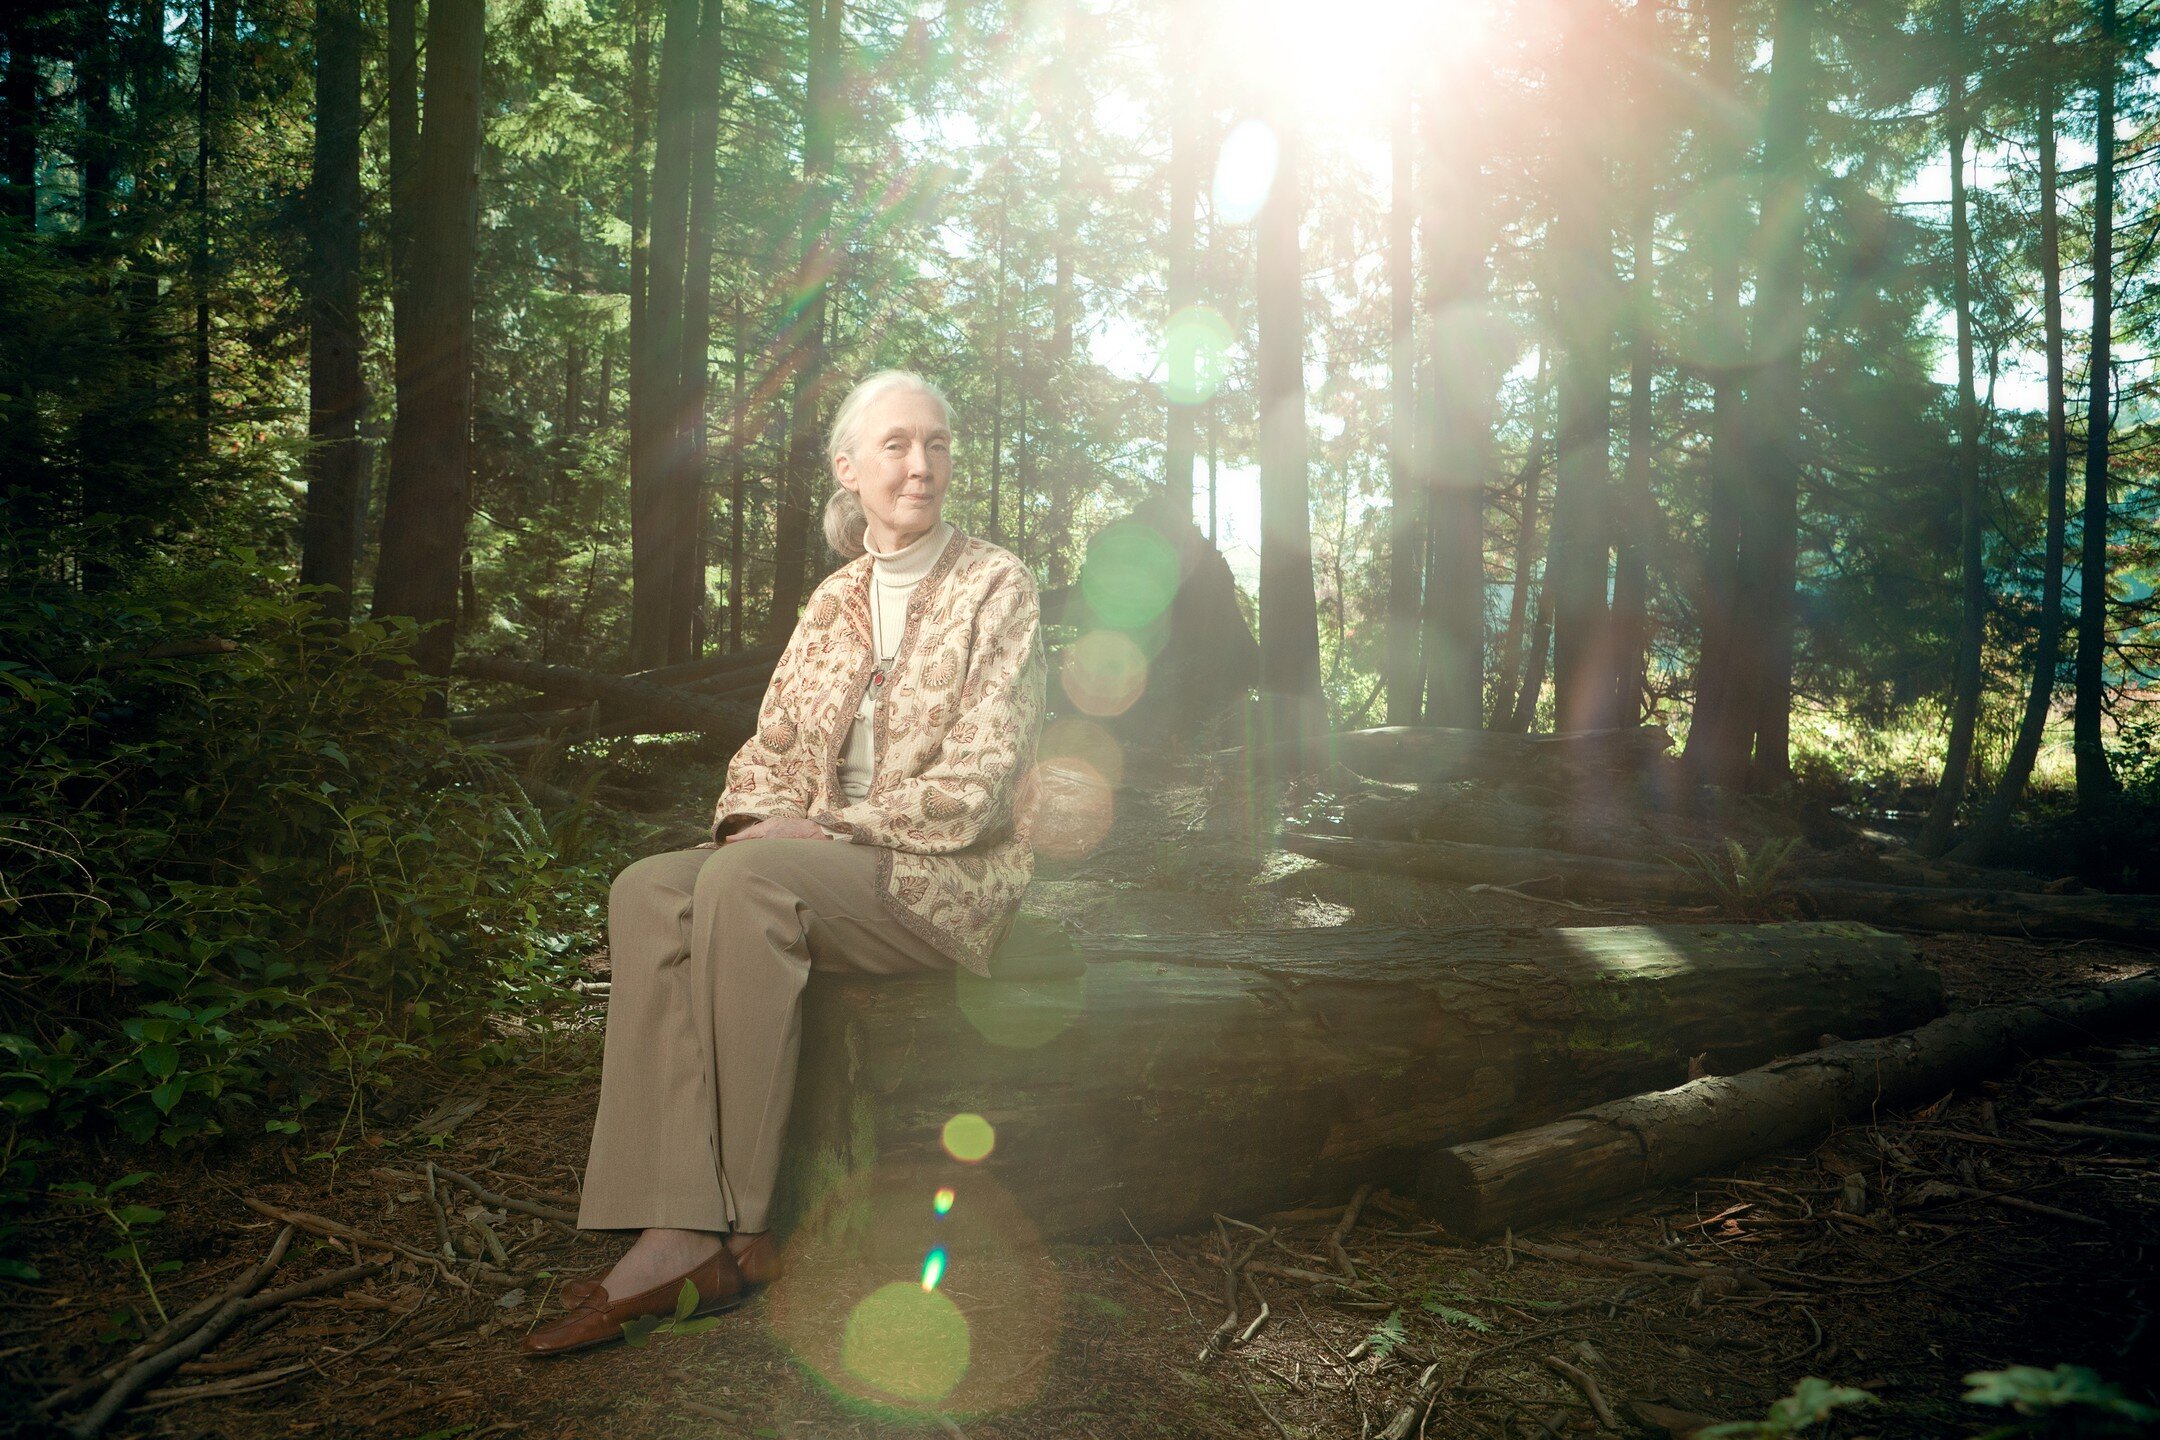 @janegoodallinst 
90 years young! Shot by @crismanphoto